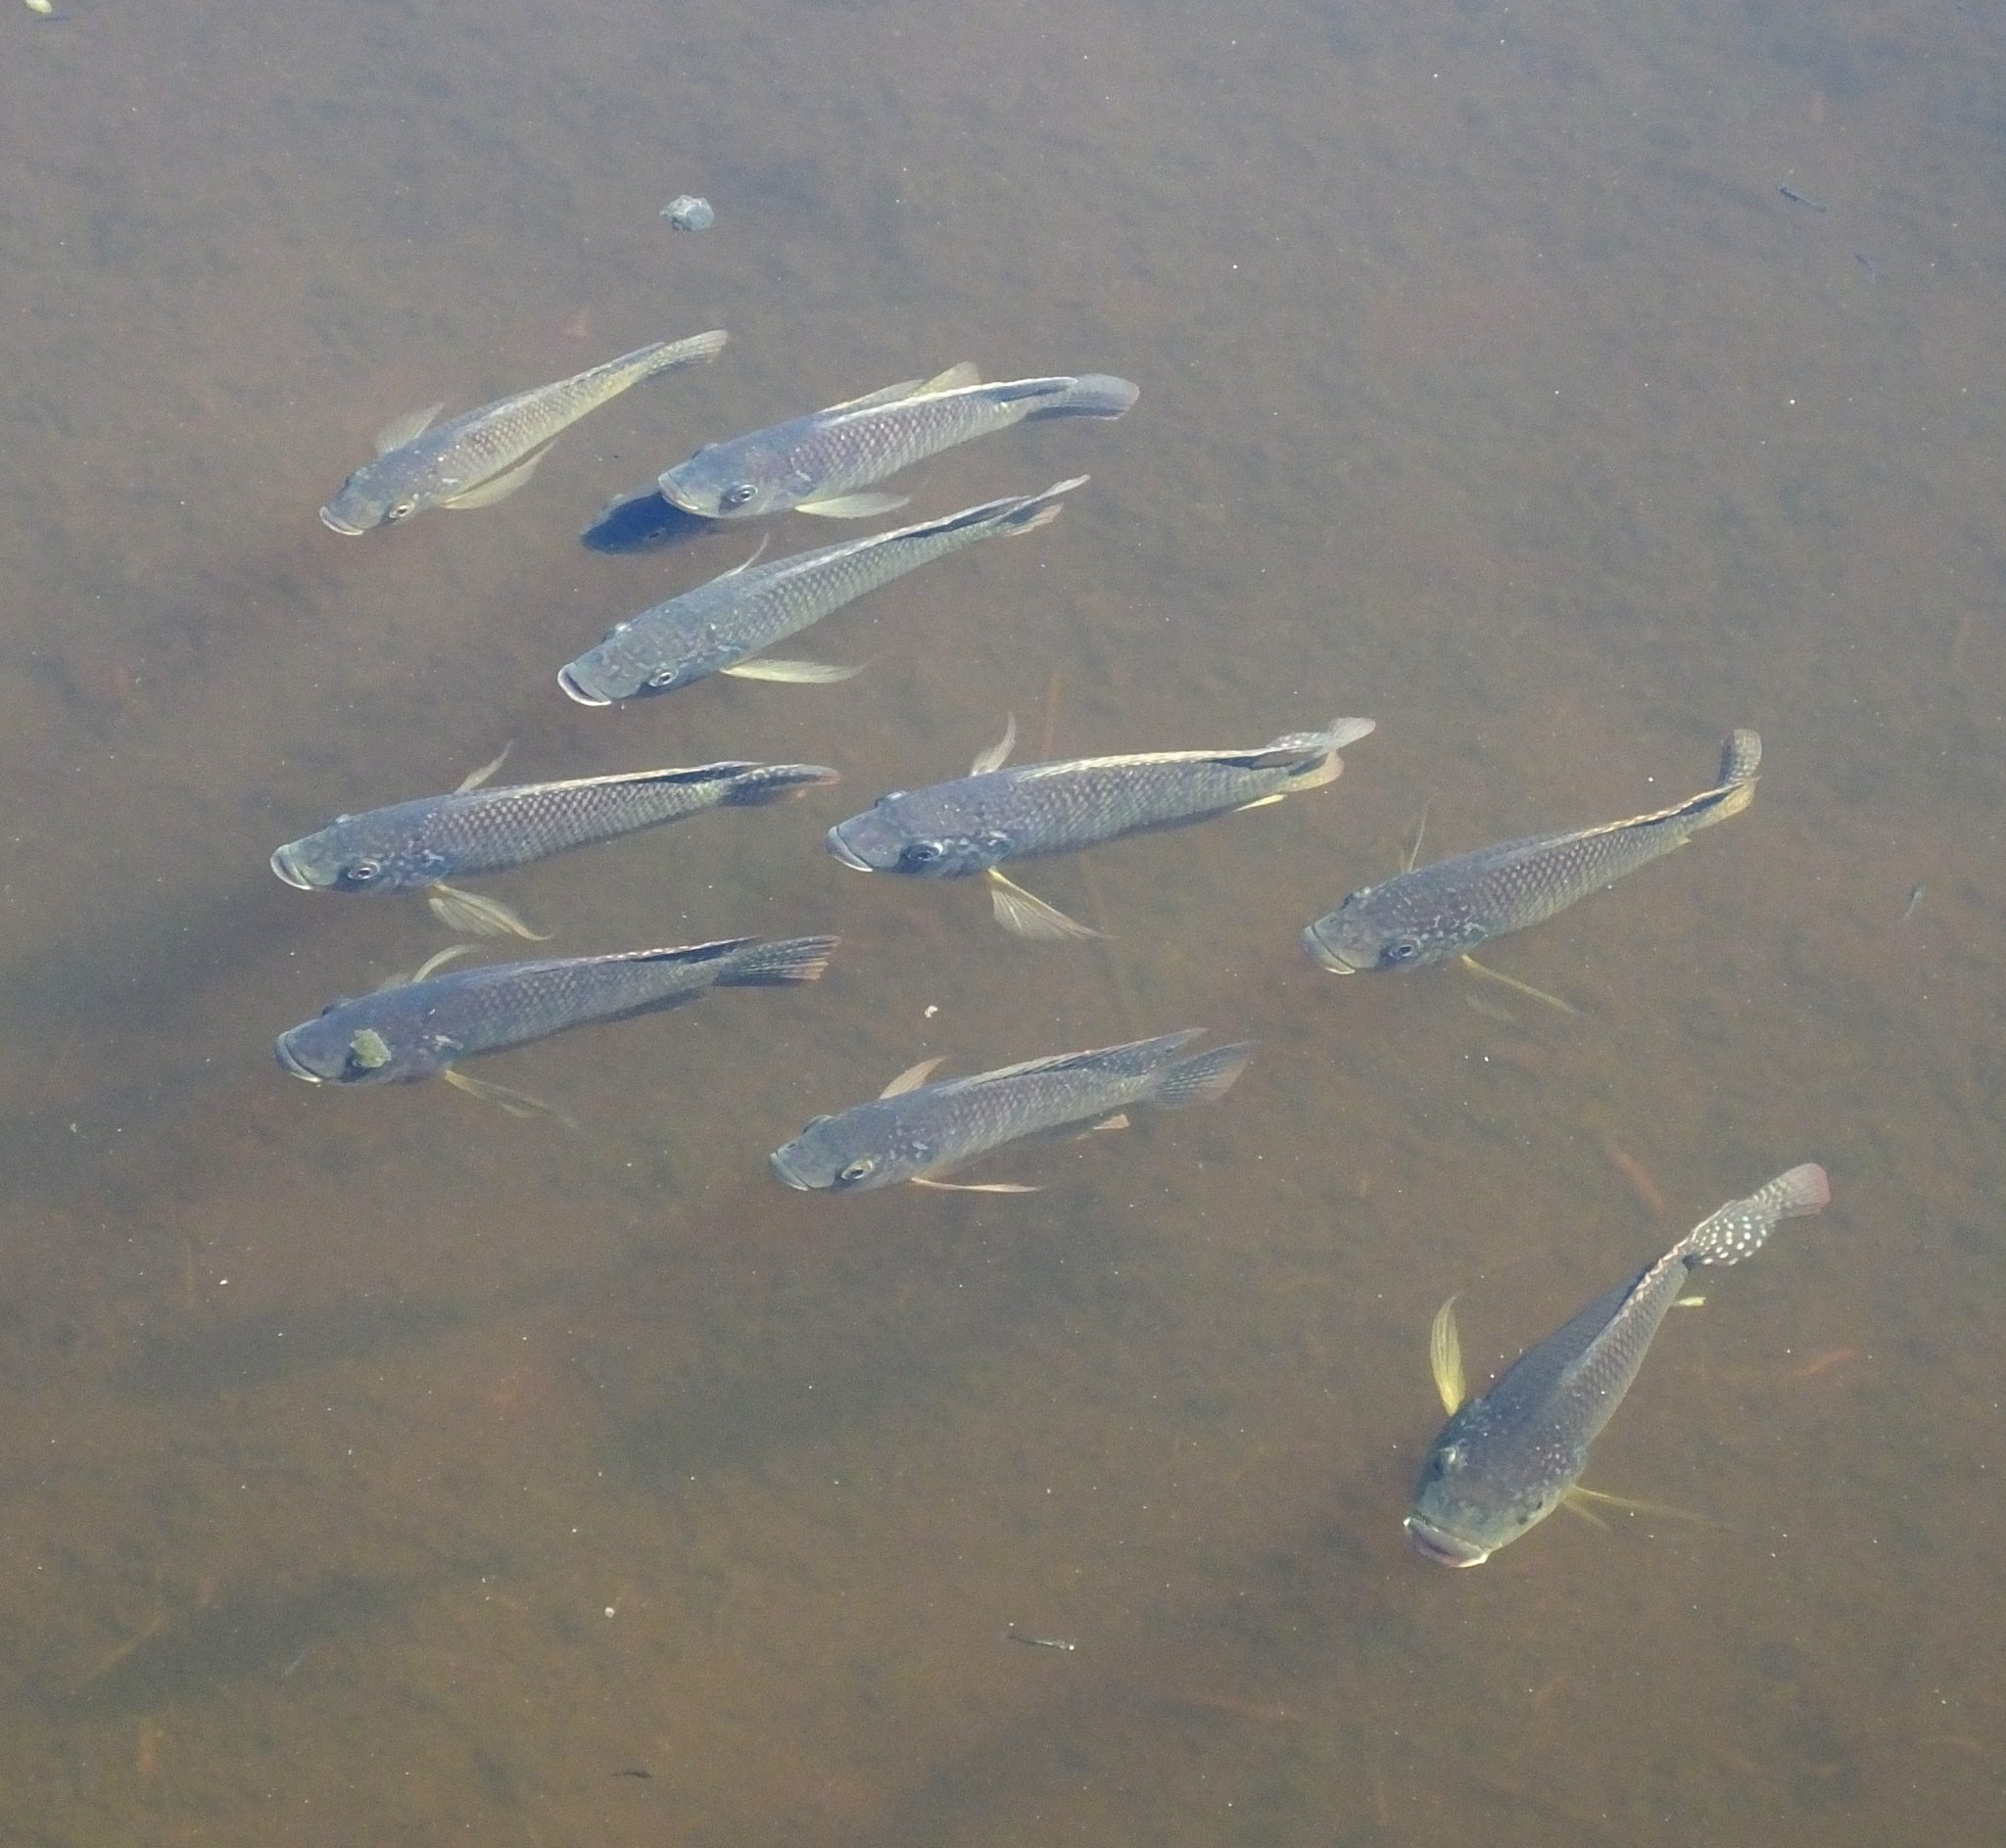 These are a variety of Blue Tilapia swimming in the wetlands.